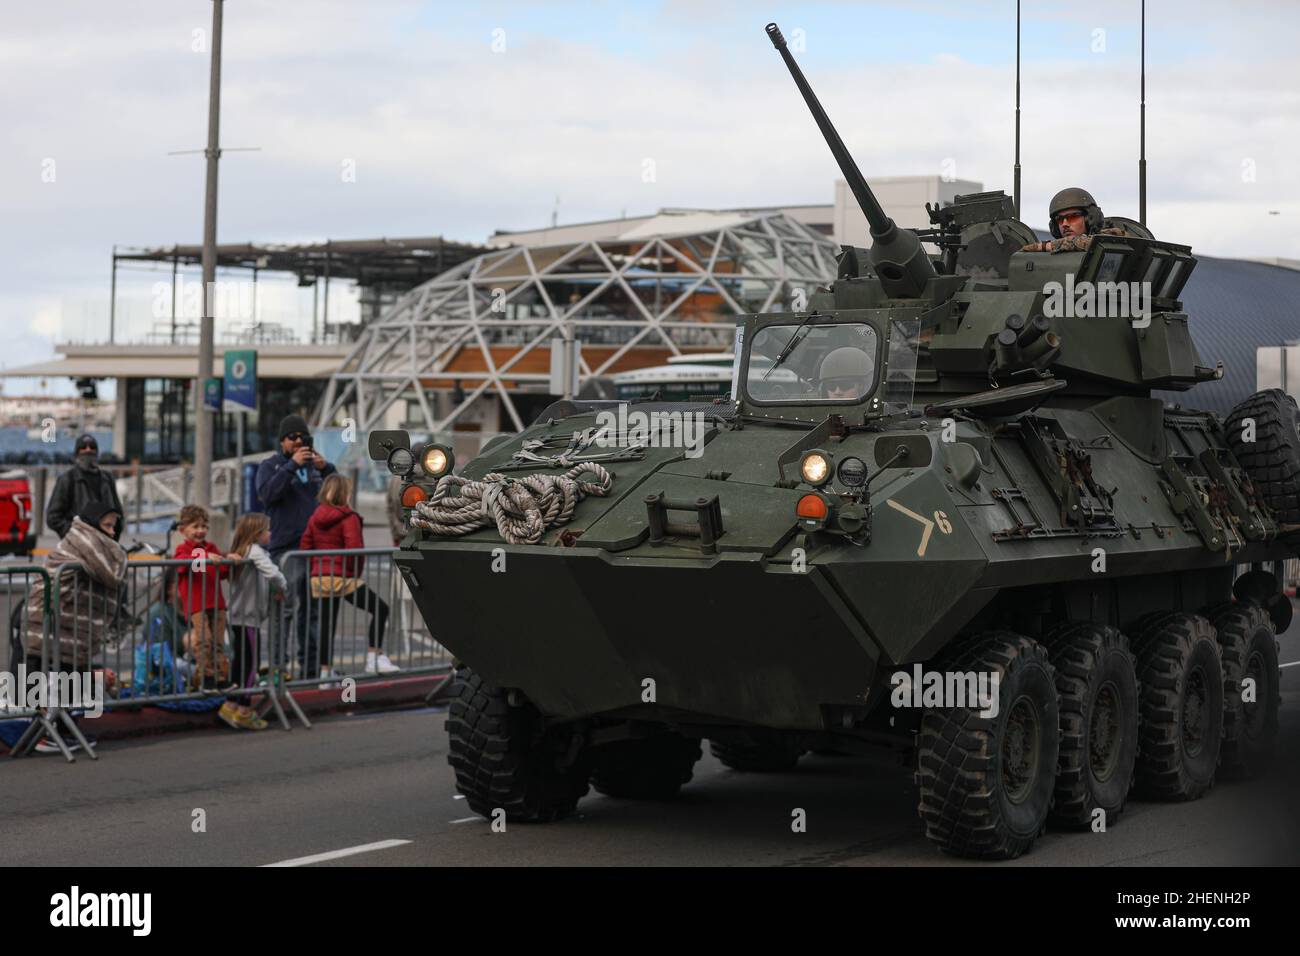 U.S. Marines with 1st Marine Division (1st MARDIV) drive a light armored vehicle in the San Diego County Credit Union Holiday Bowl Parade at San Diego, California, Dec. 29, 2021. The 1st MARDIV showcased vehicles and equipment to increase awareness of Marine Corps capabilities among the local community. (U.S. Marine Corps Photo by Lance Cpl. Brayden Daniel) Stock Photo